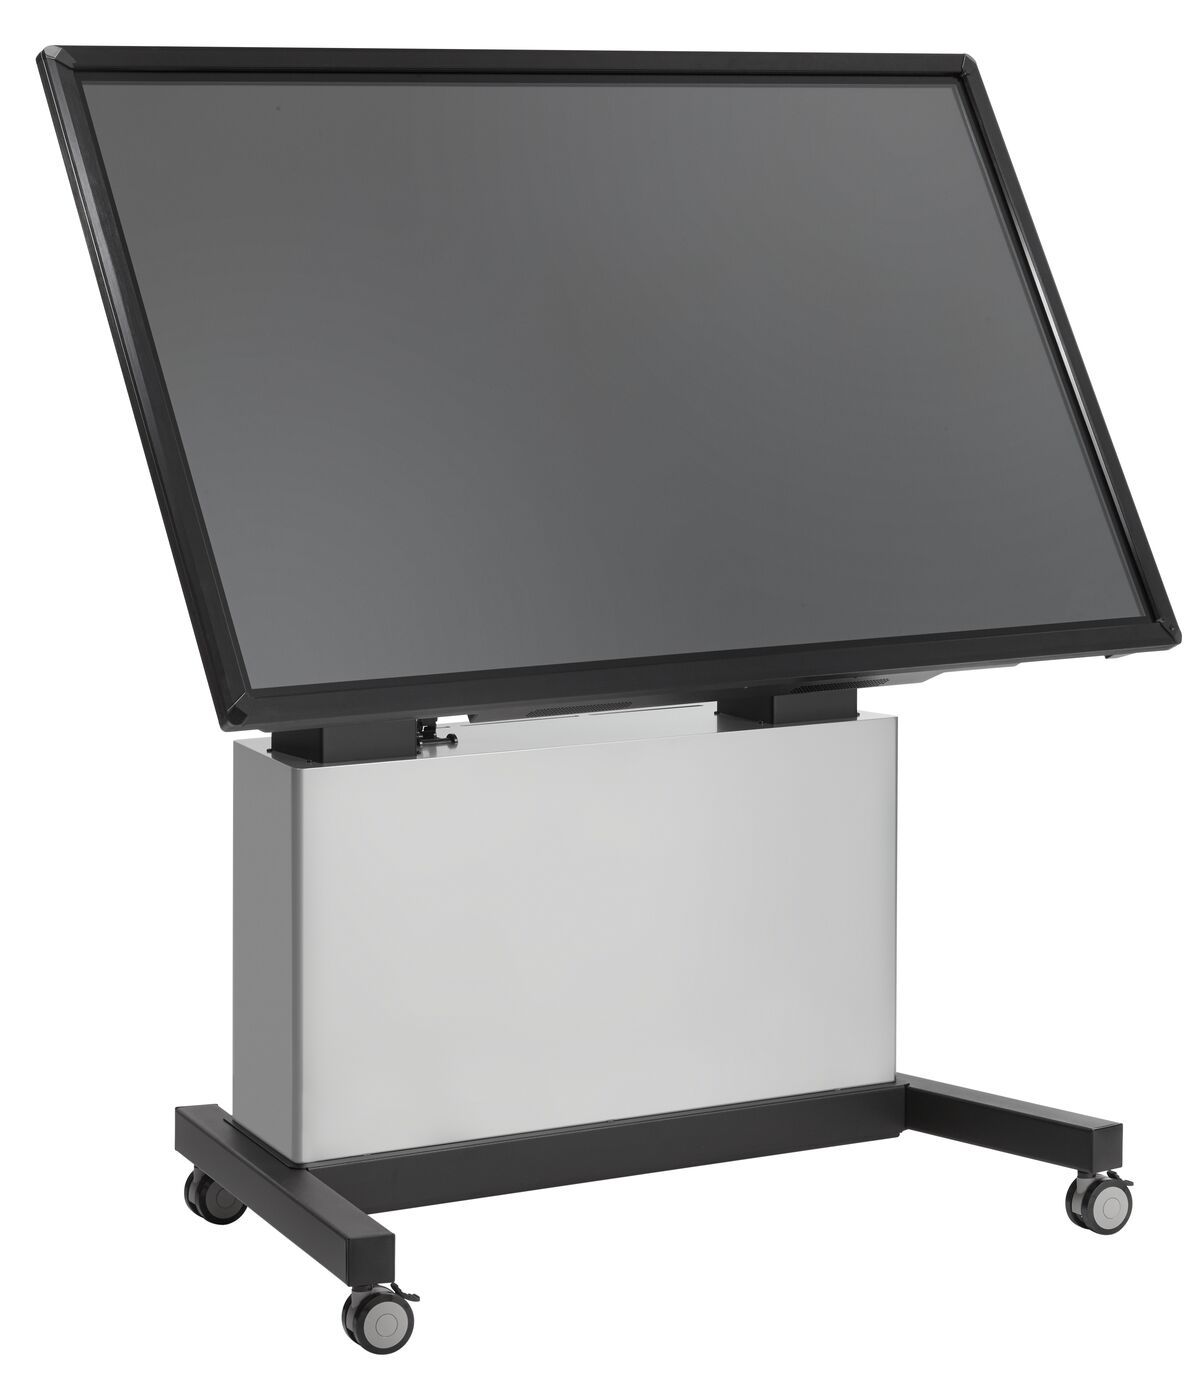 Vogel's PFTE 7121 Motorized Touch Table - Application